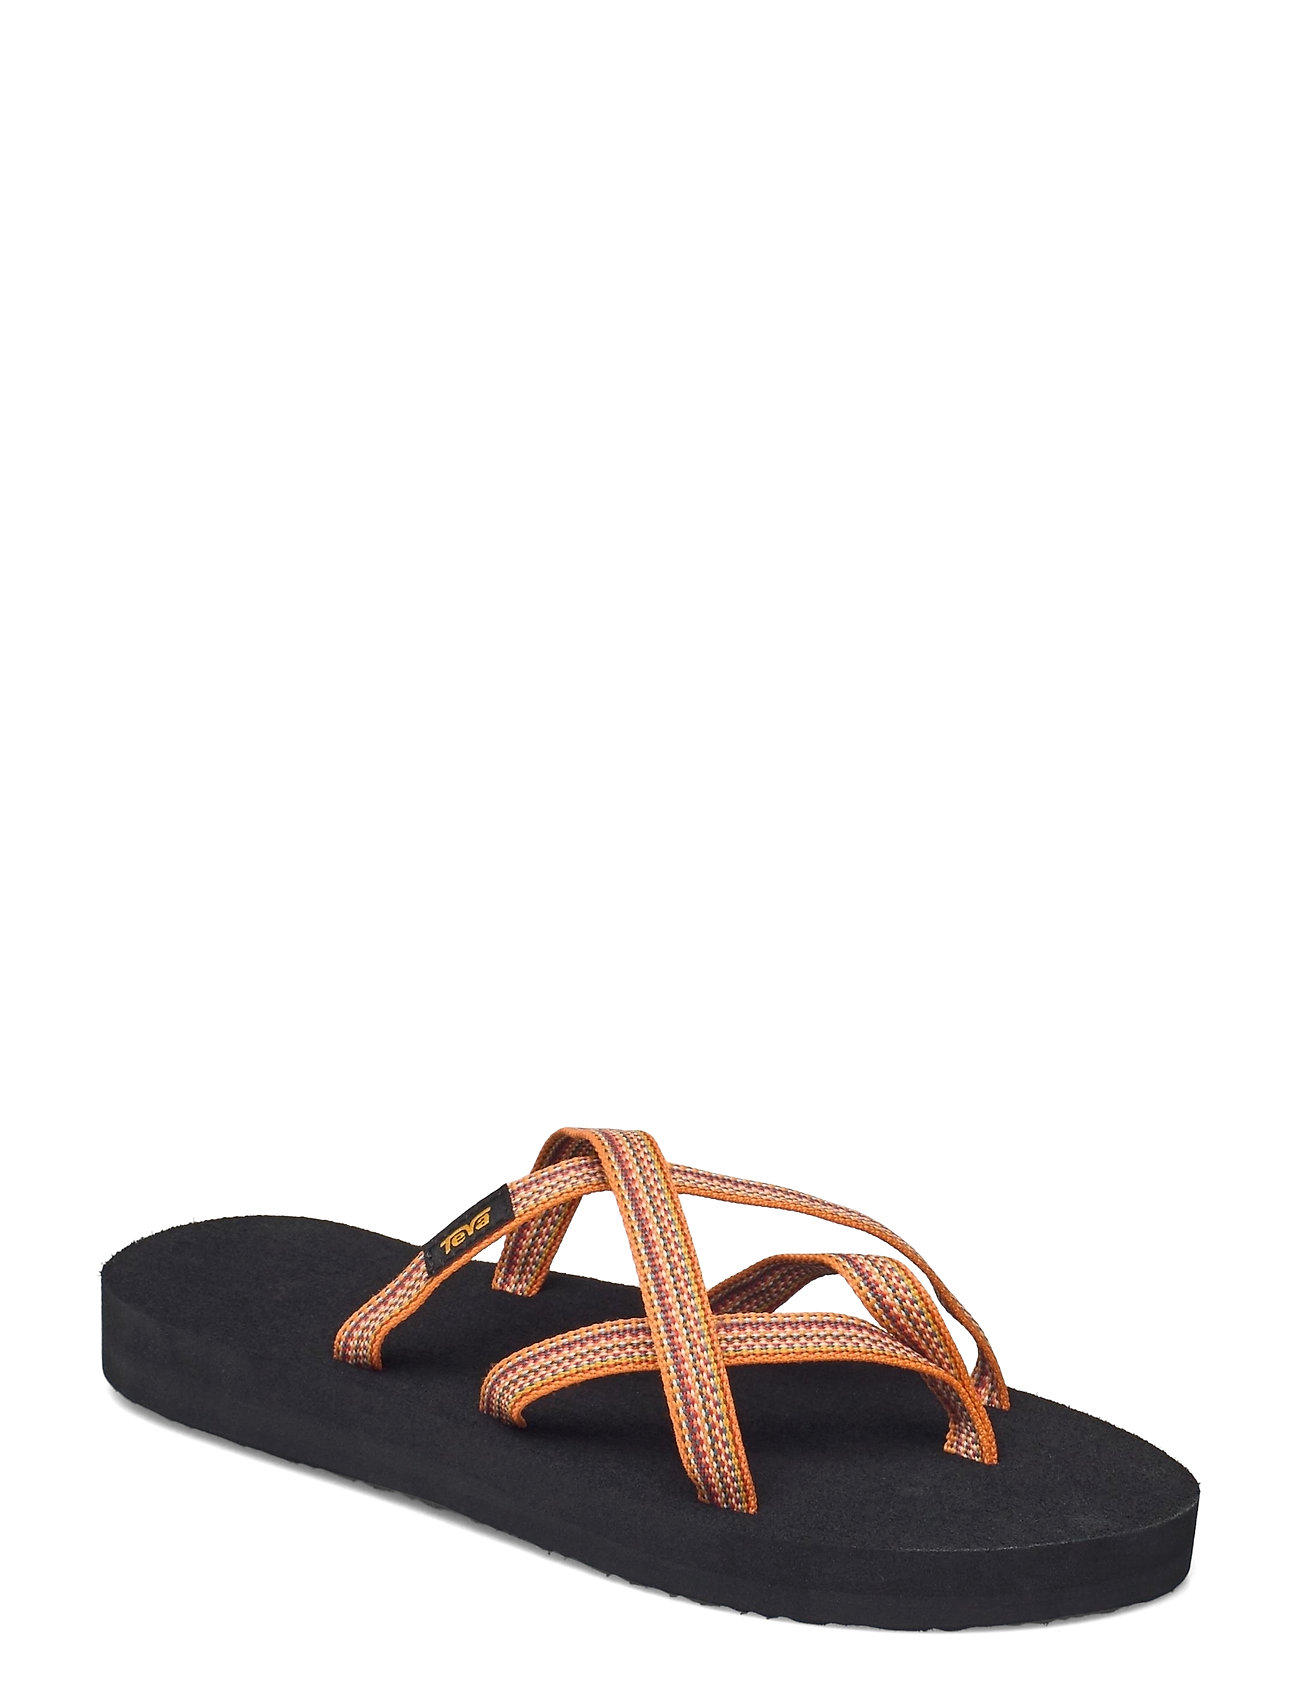 W Olowahu Shoes Summer Shoes Flat Sandals Musta Teva